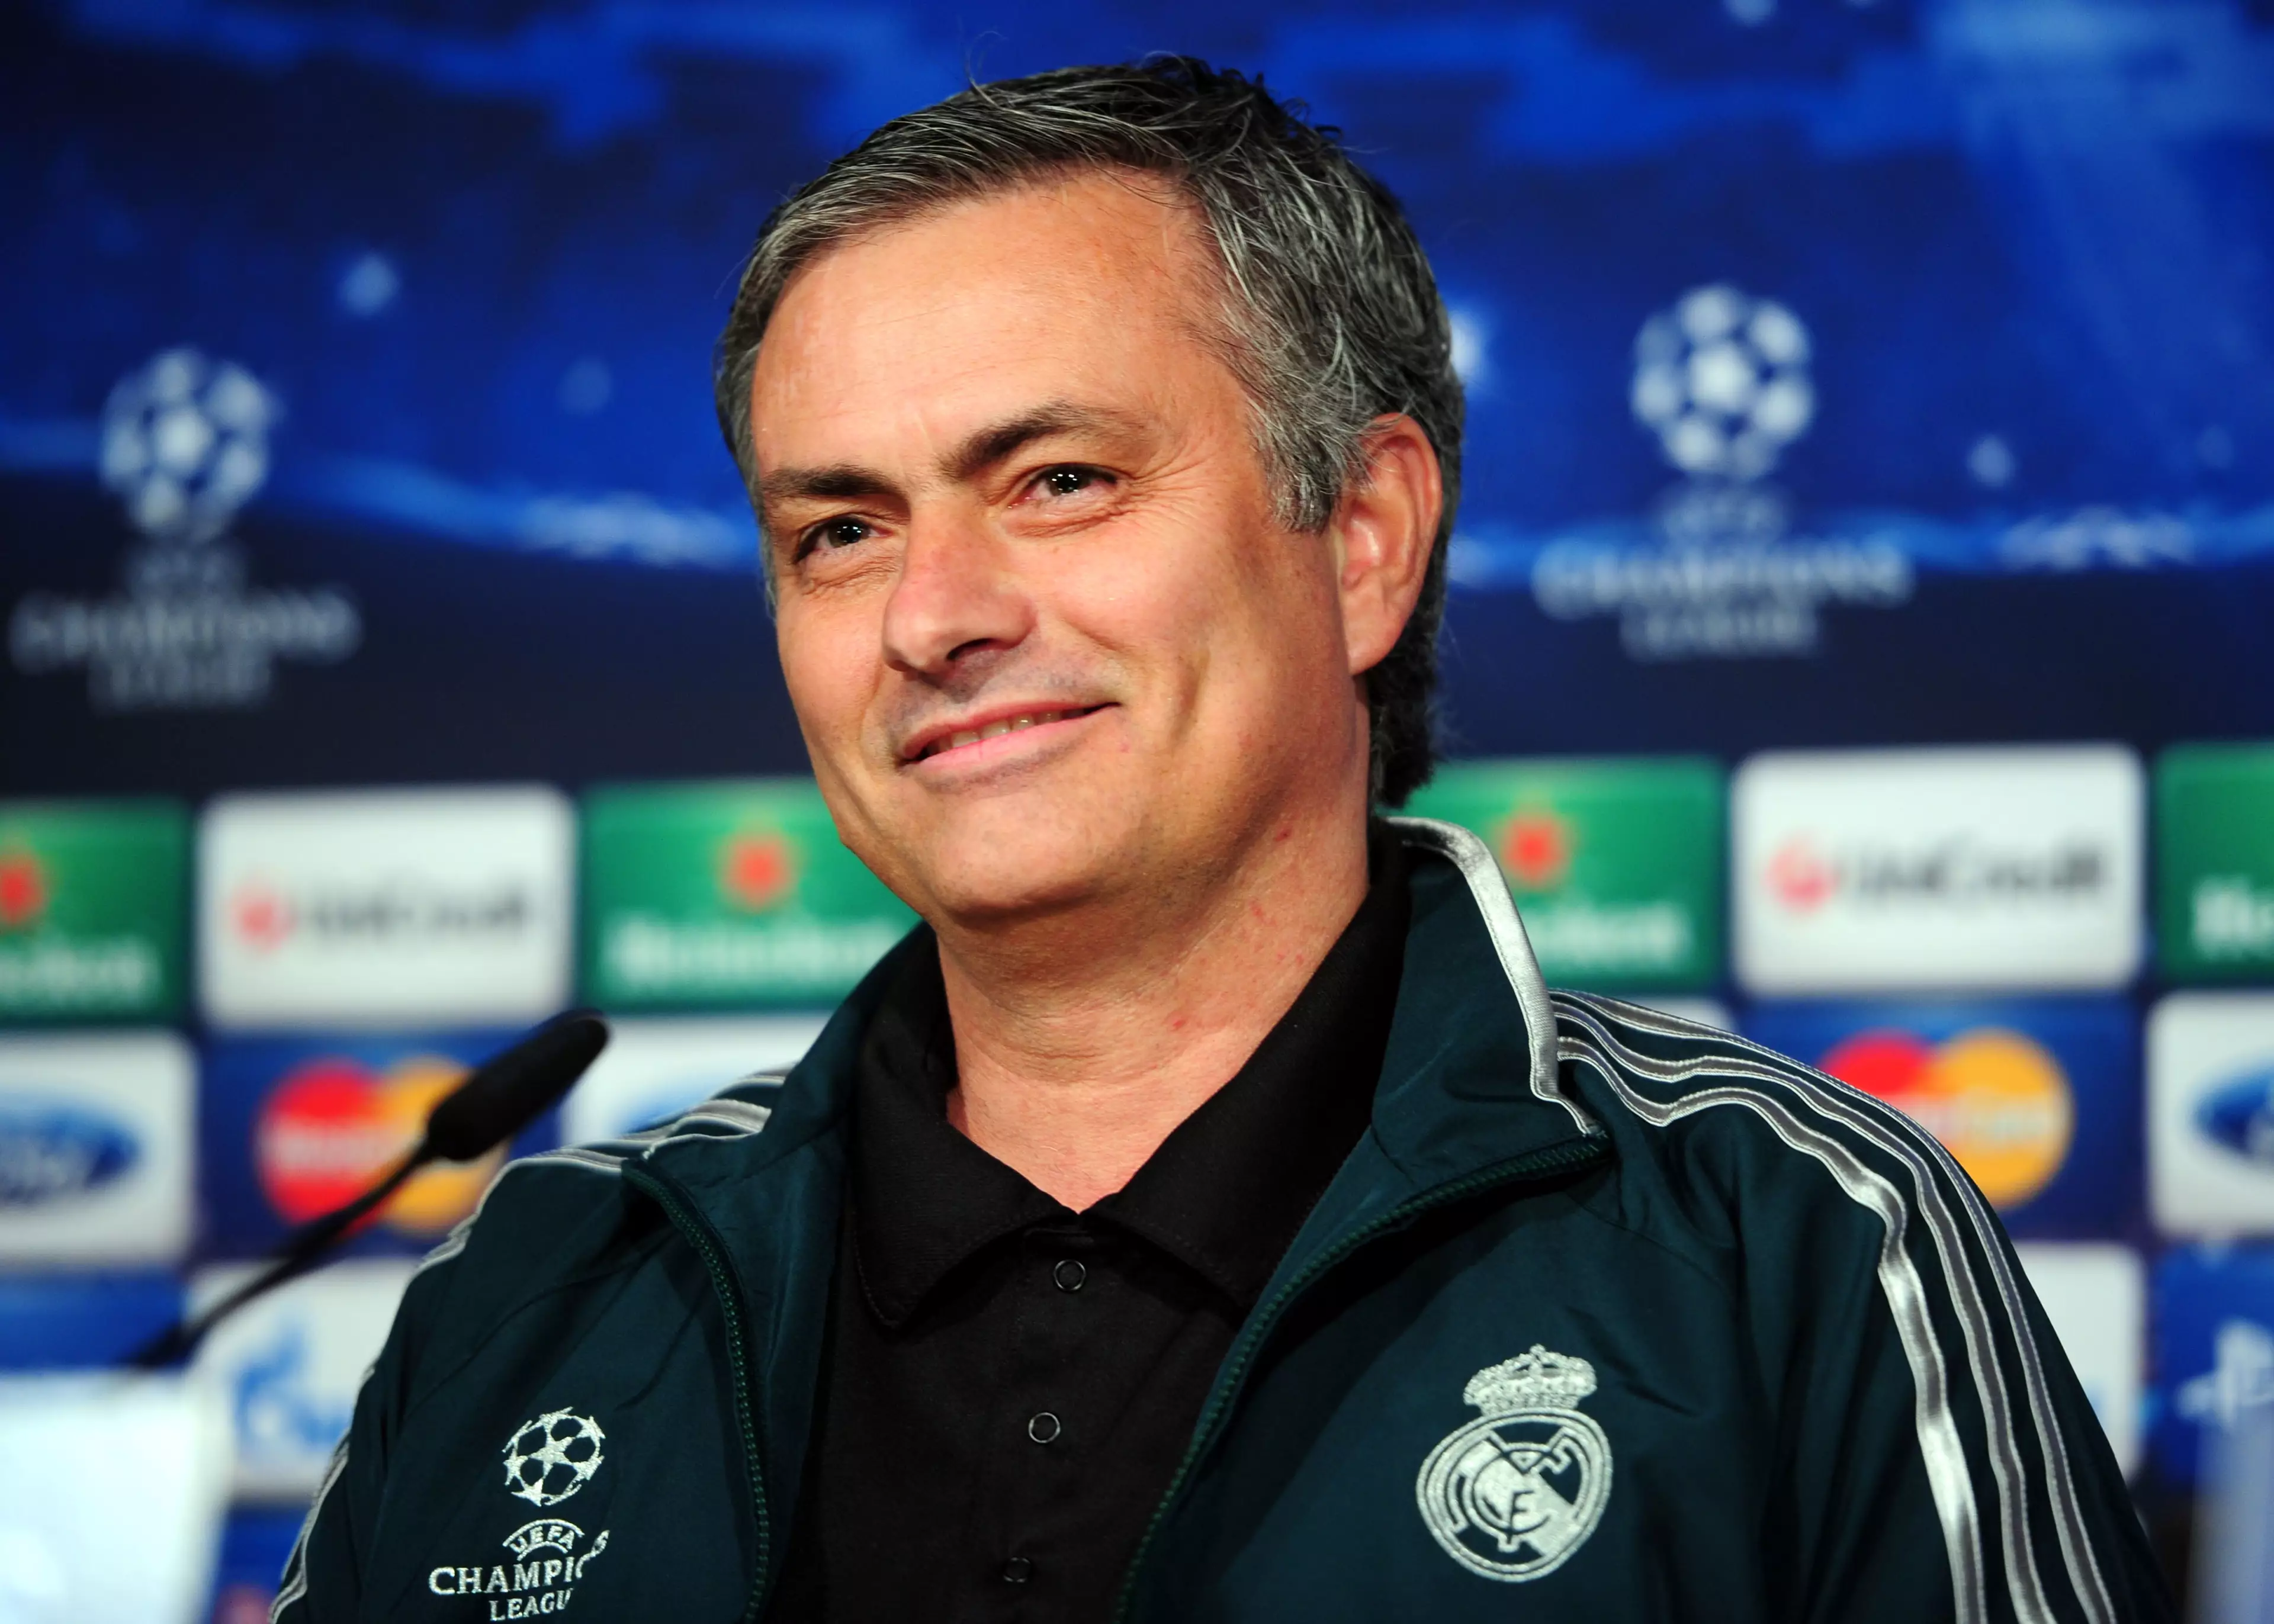 Could Mourinho be Real manager once again? Image: PA Images